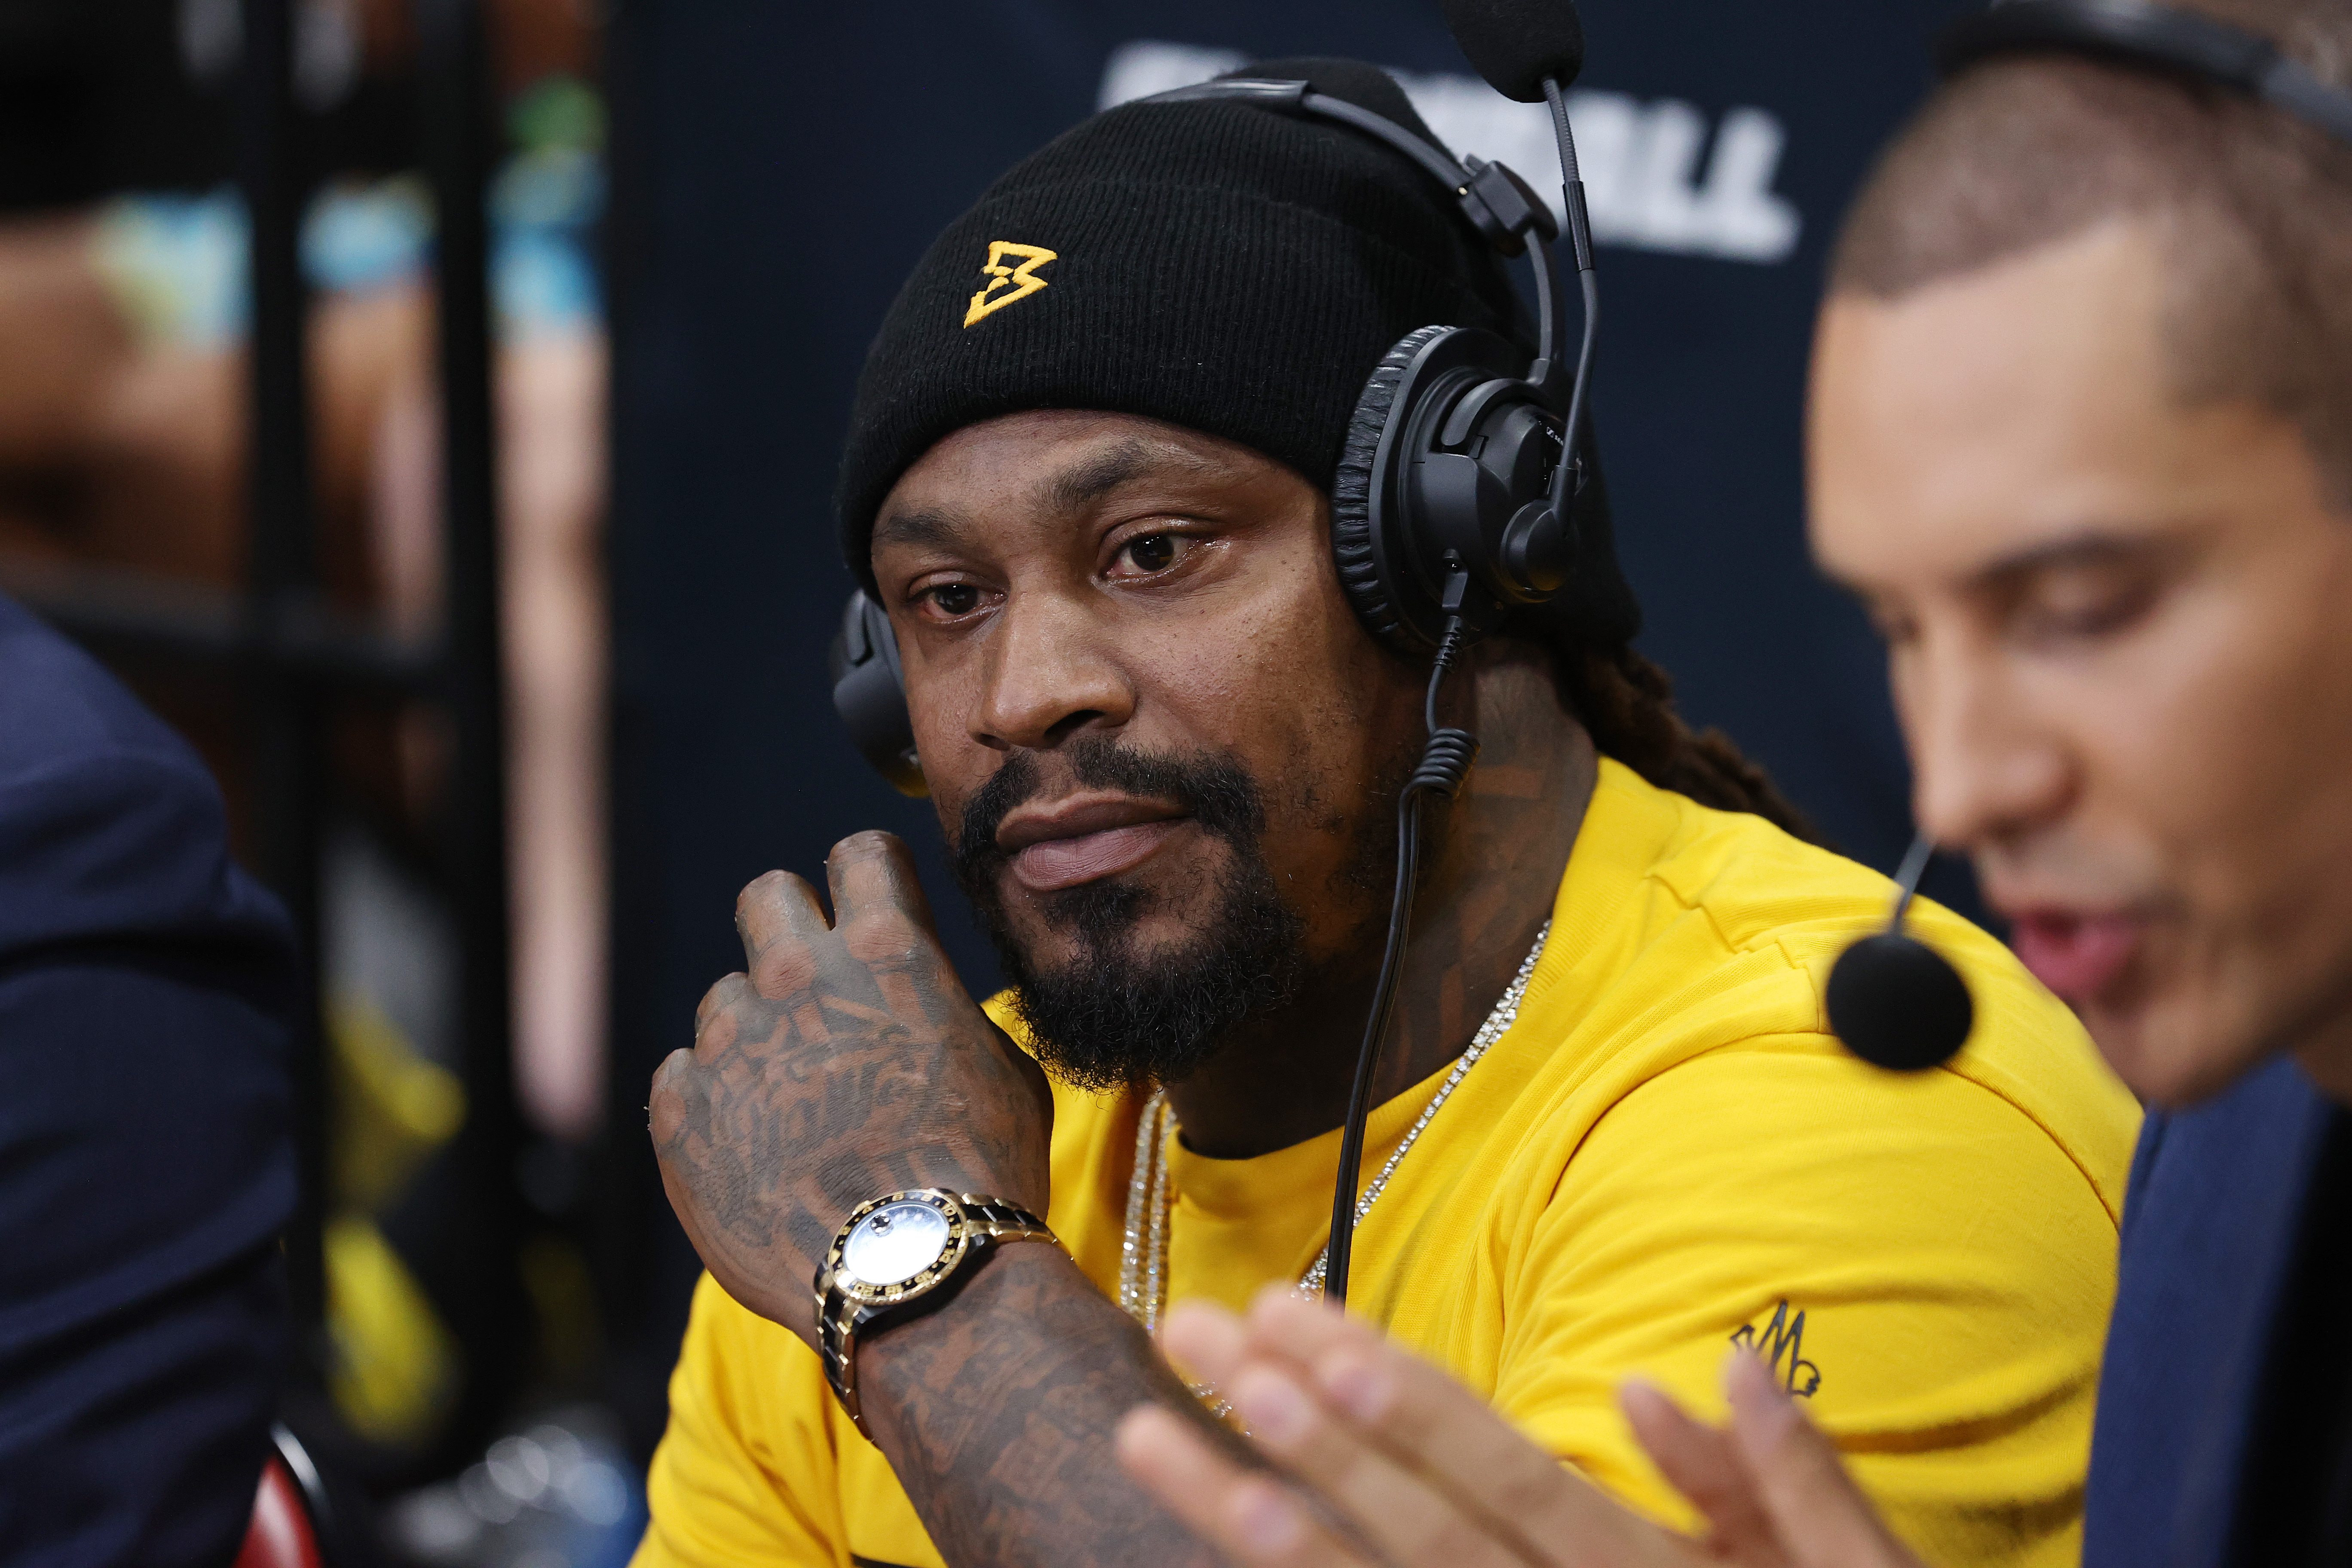 Marshawn Lynch commentating during a SlamBall playoff game on August 15, 2023, in Las Vegas, Nevada. | Source: Getty Images